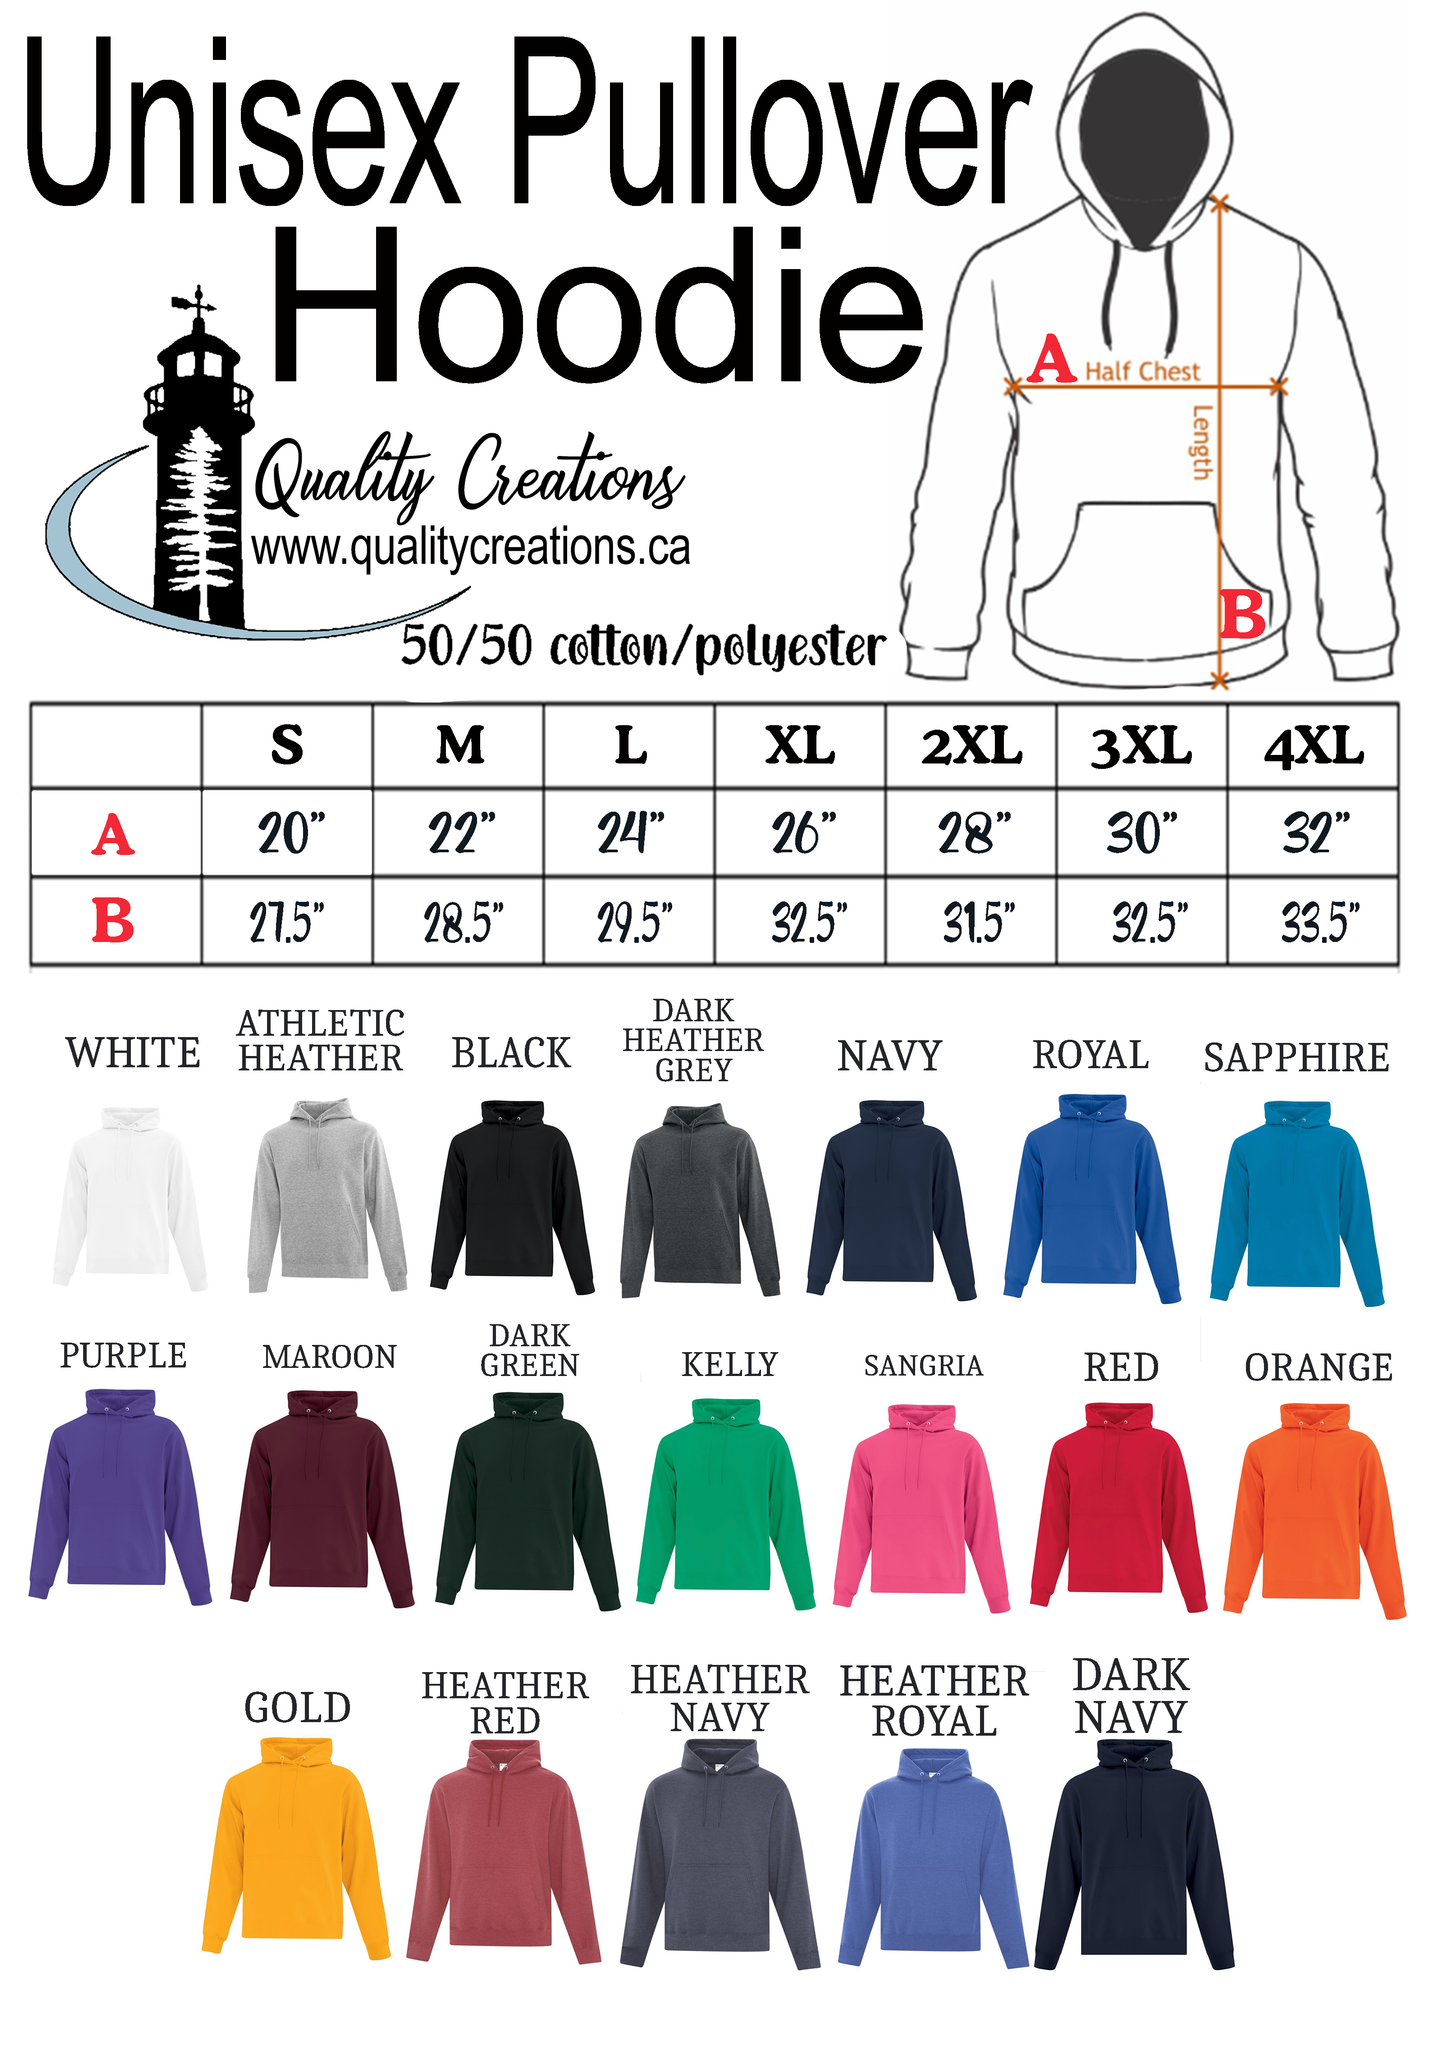 pullover hoodie sizing, washing & colour chart moncton salisbury canada